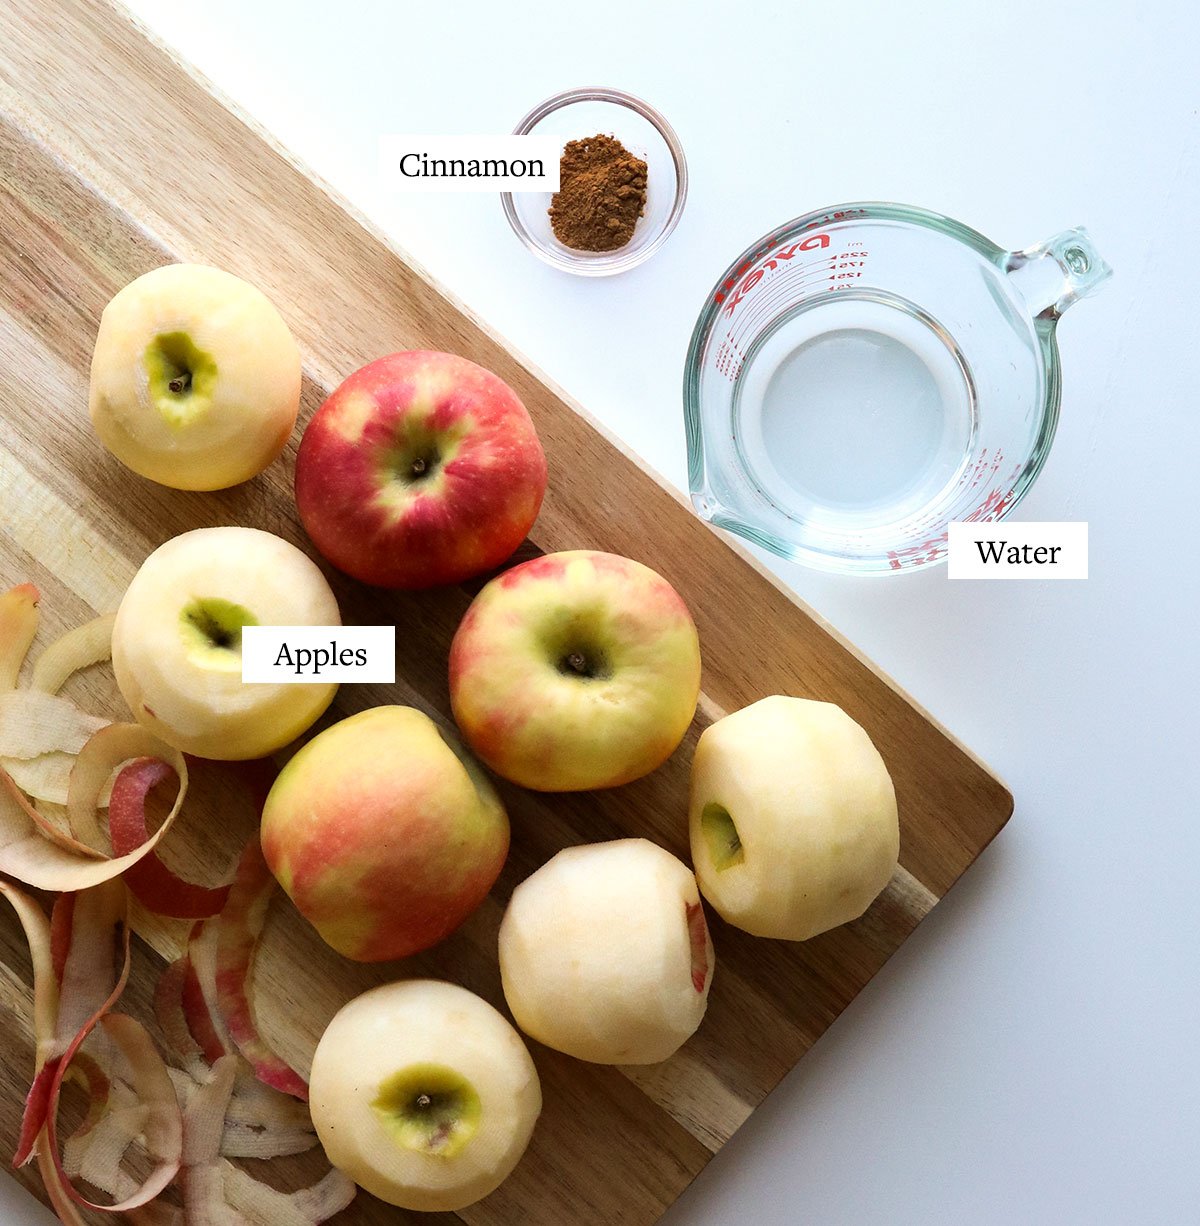 apples on cutting board with water and cinnamon labeled for making applesauce.